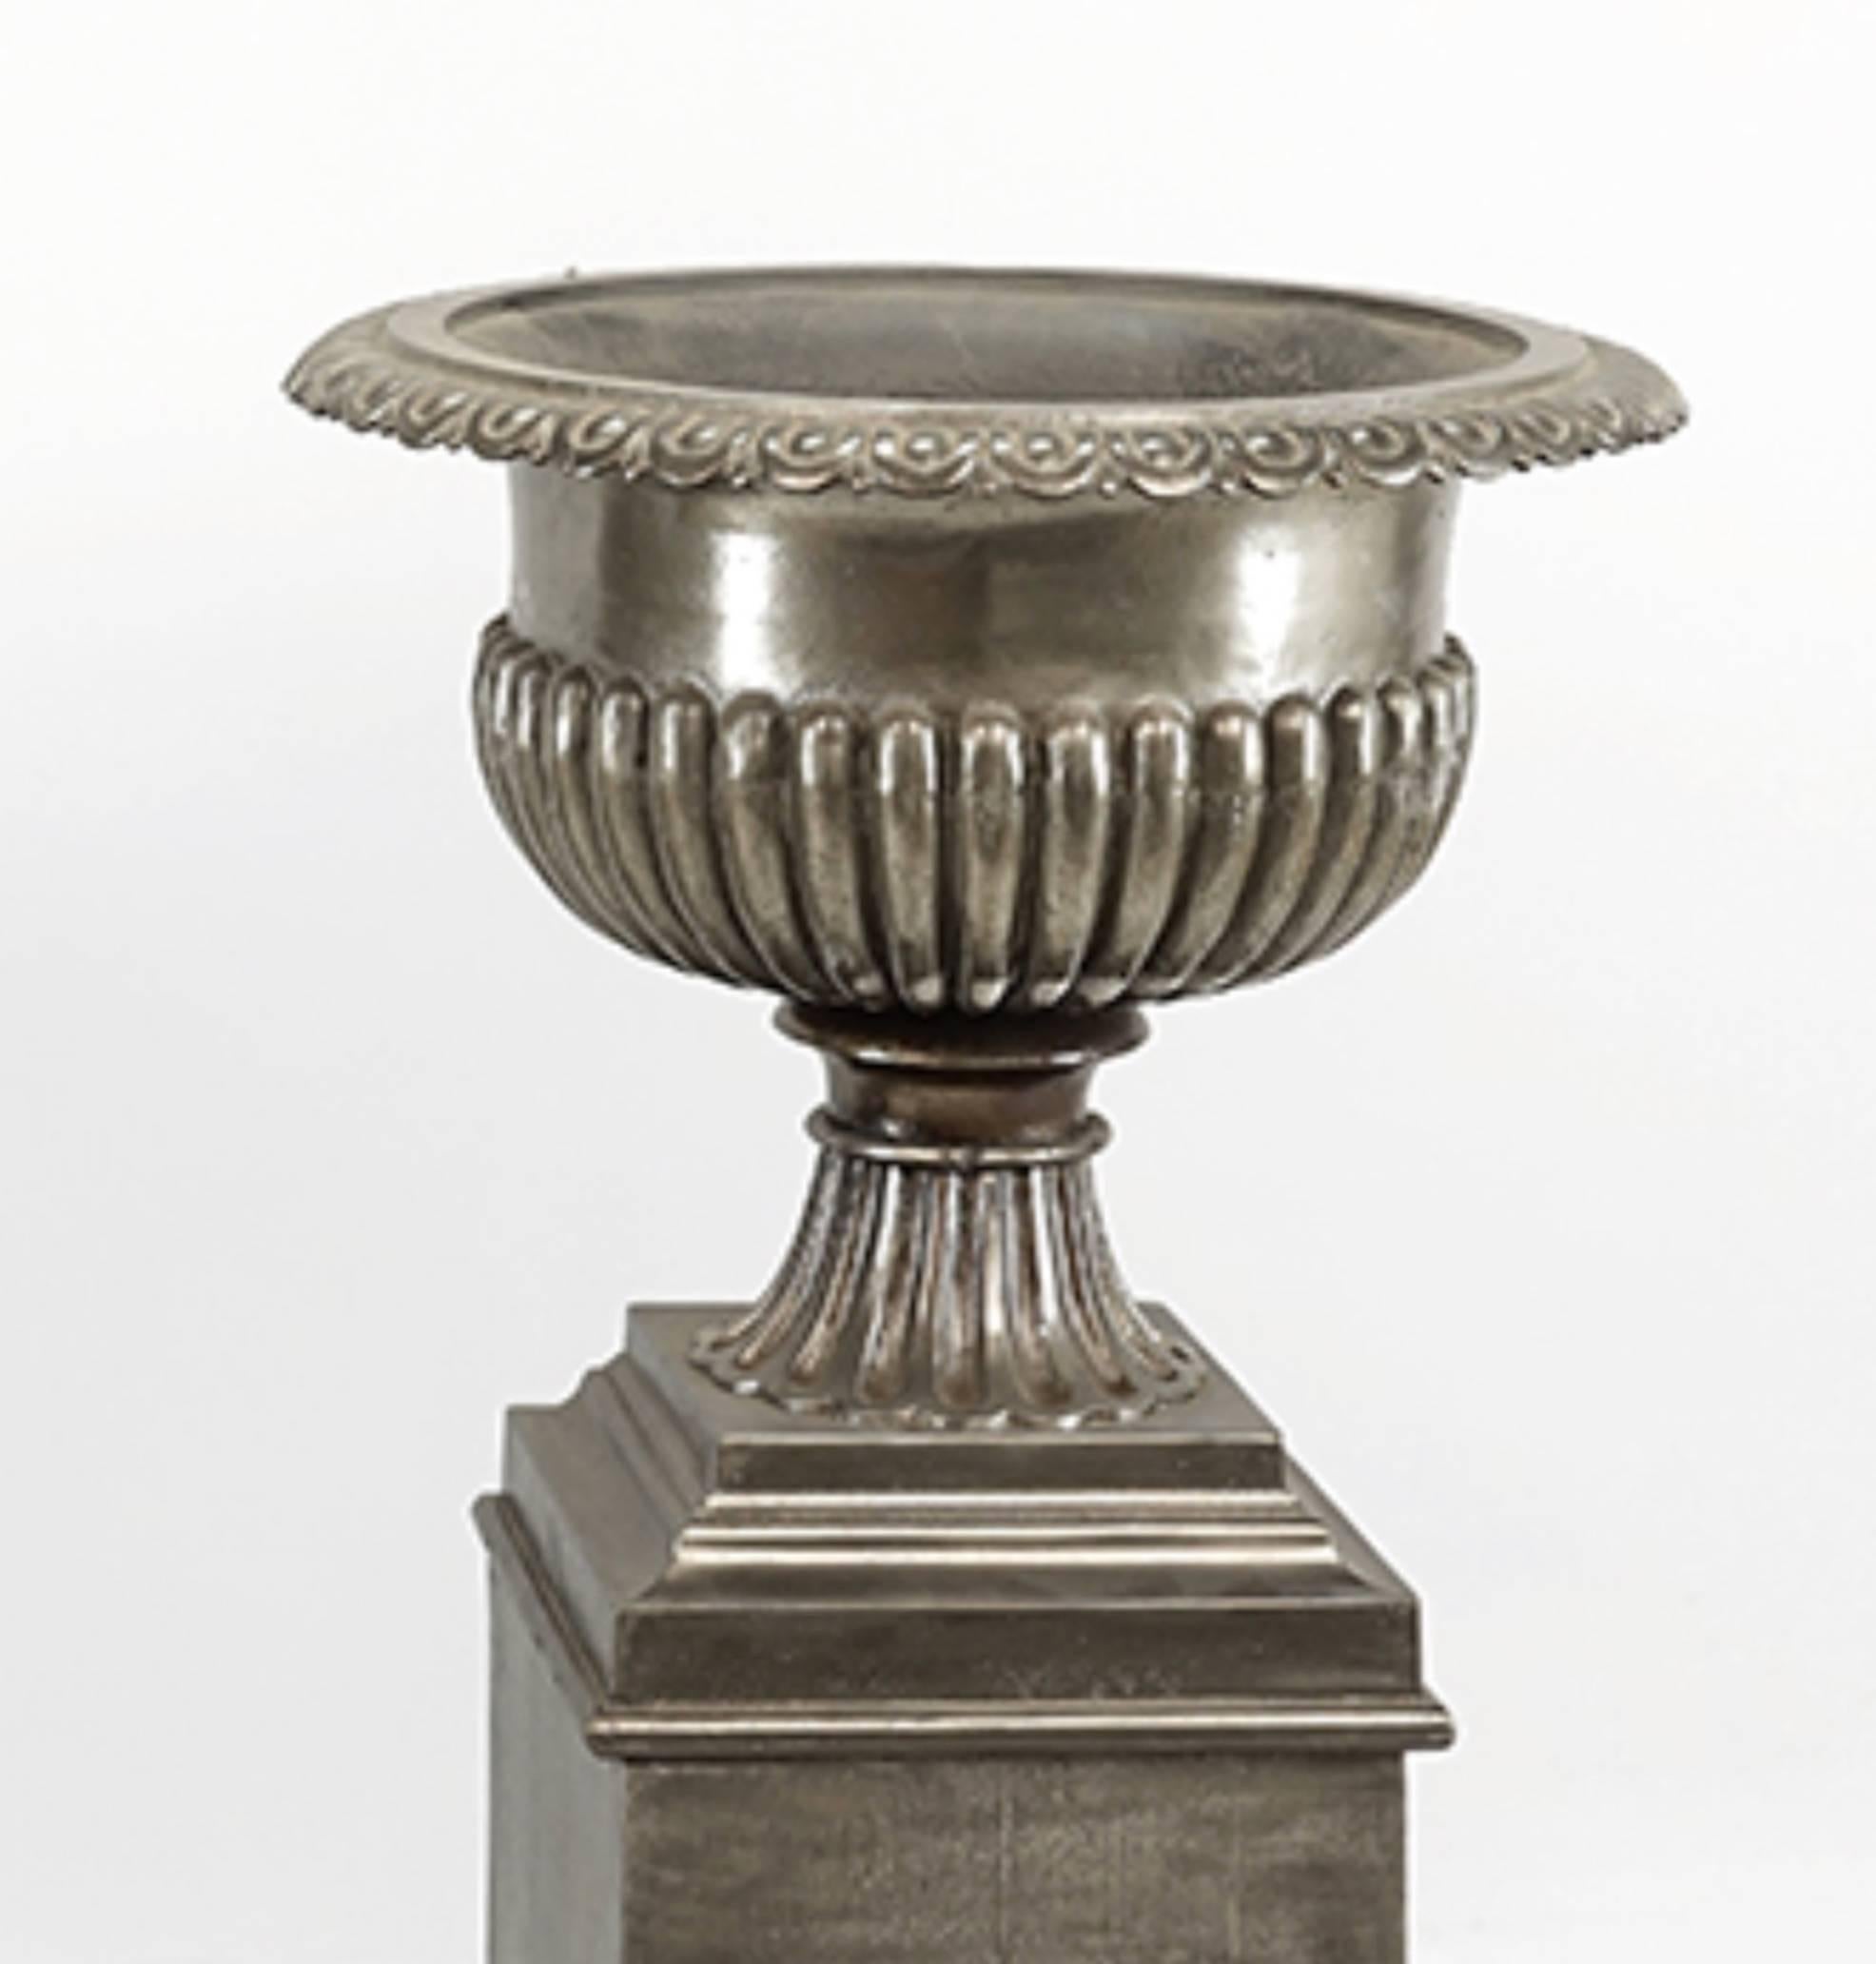 One pair very stately 19th century English urns on stands, brushed steel finish.  Great dramatic statement for entry, indoor or out door use.  